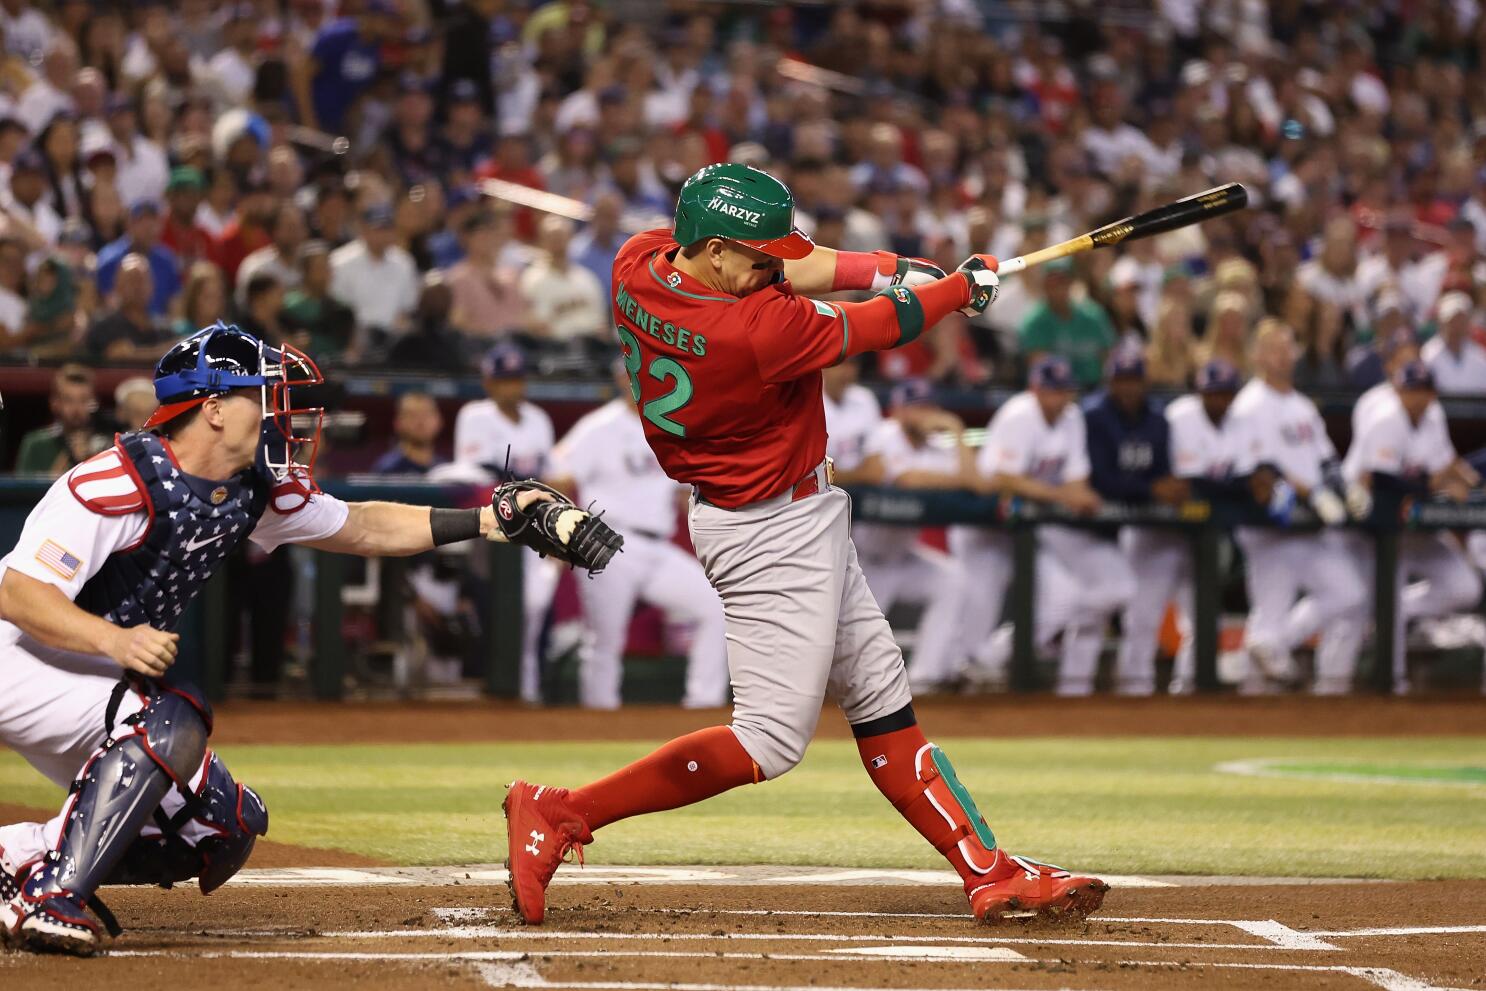 Mexico shocks U.S. with an 11-5 rout in World Baseball Classic